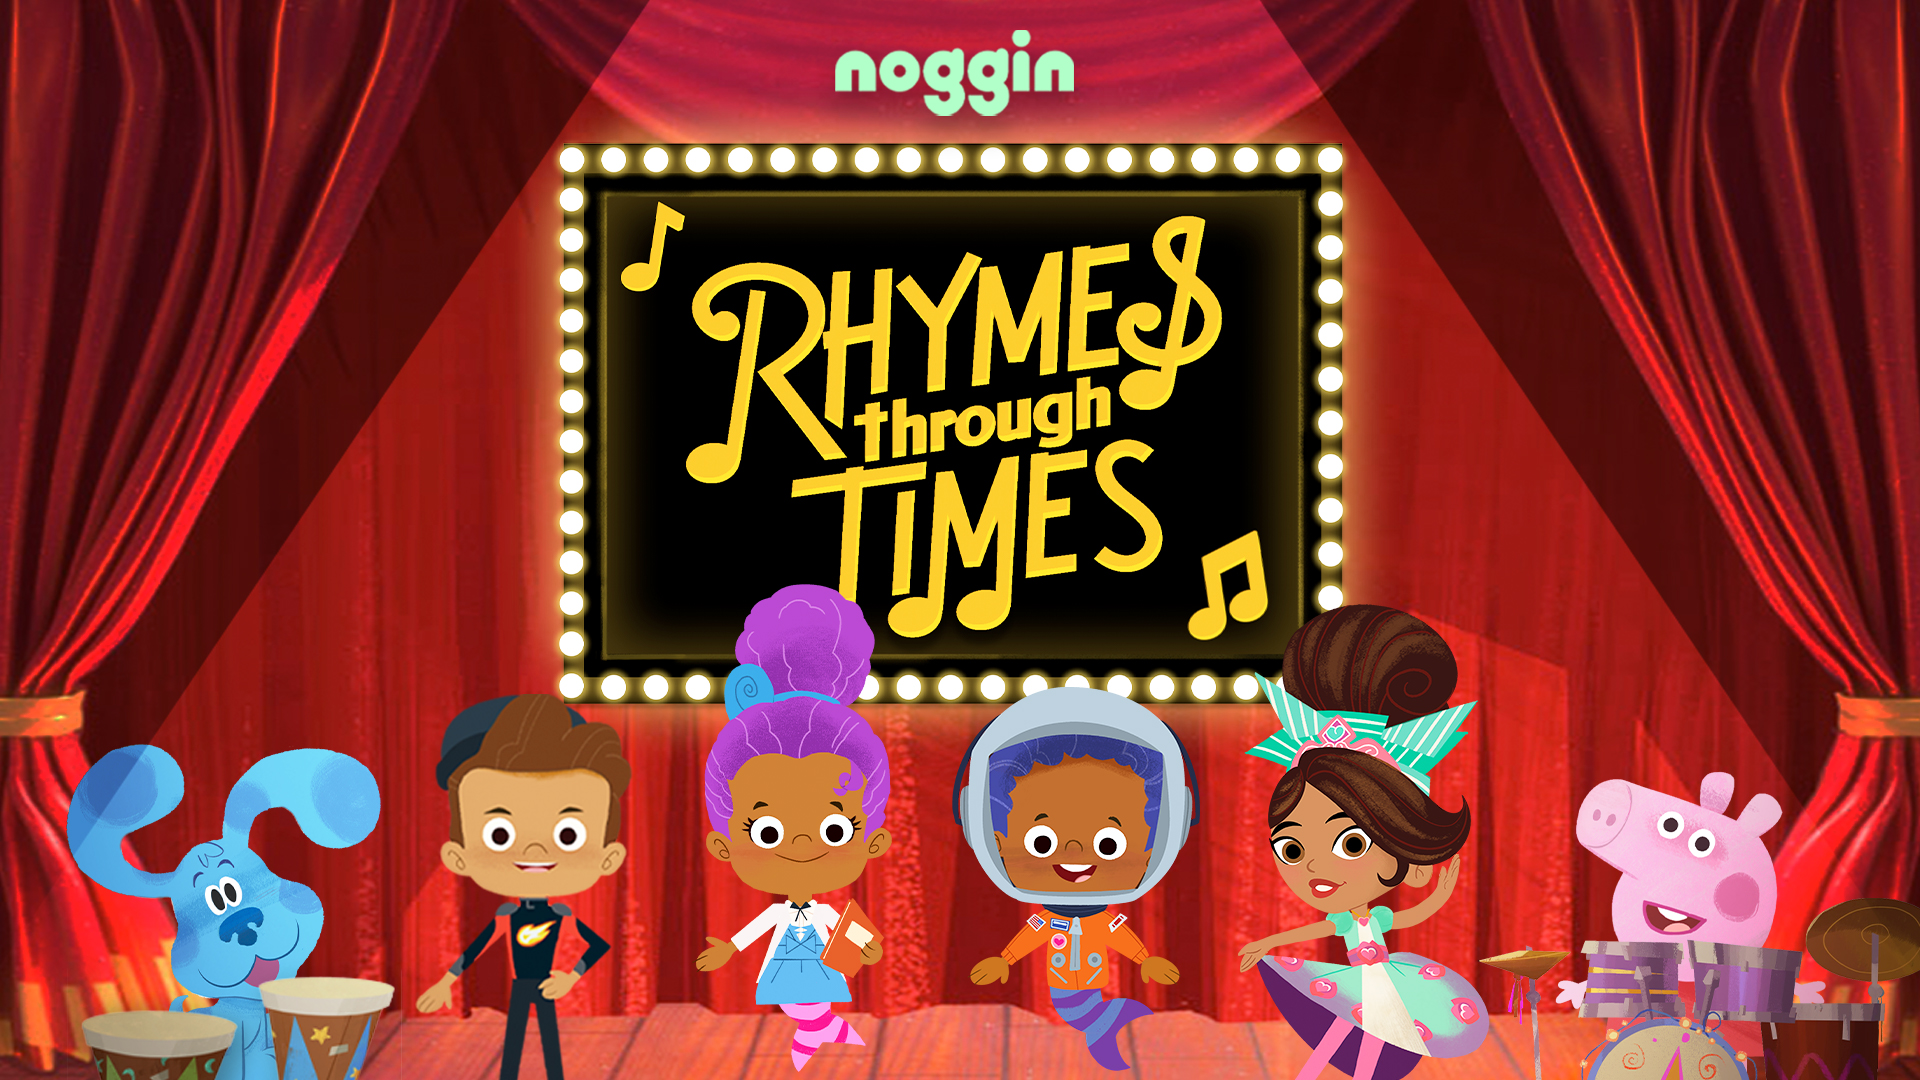 NickALive!: Noggin Debuts New Animated Musical Series 'Rhymes Through Times'